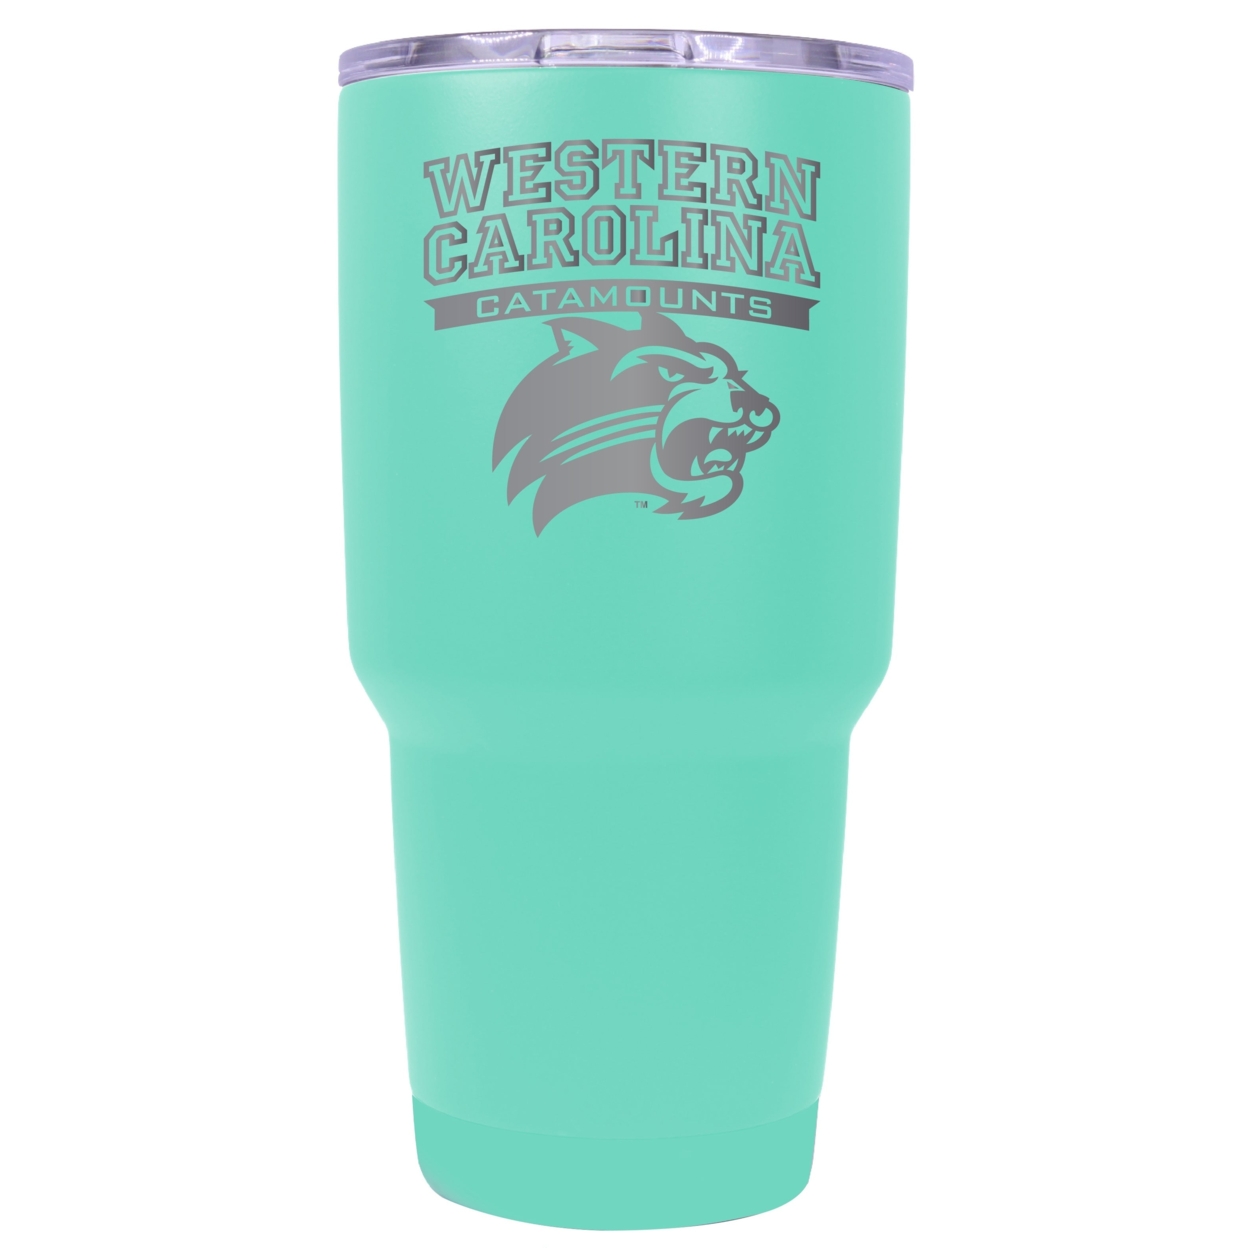 Western Carolina University 24 Oz Laser Engraved Stainless Steel Insulated Tumbler - Choose Your Color. - Seafoam